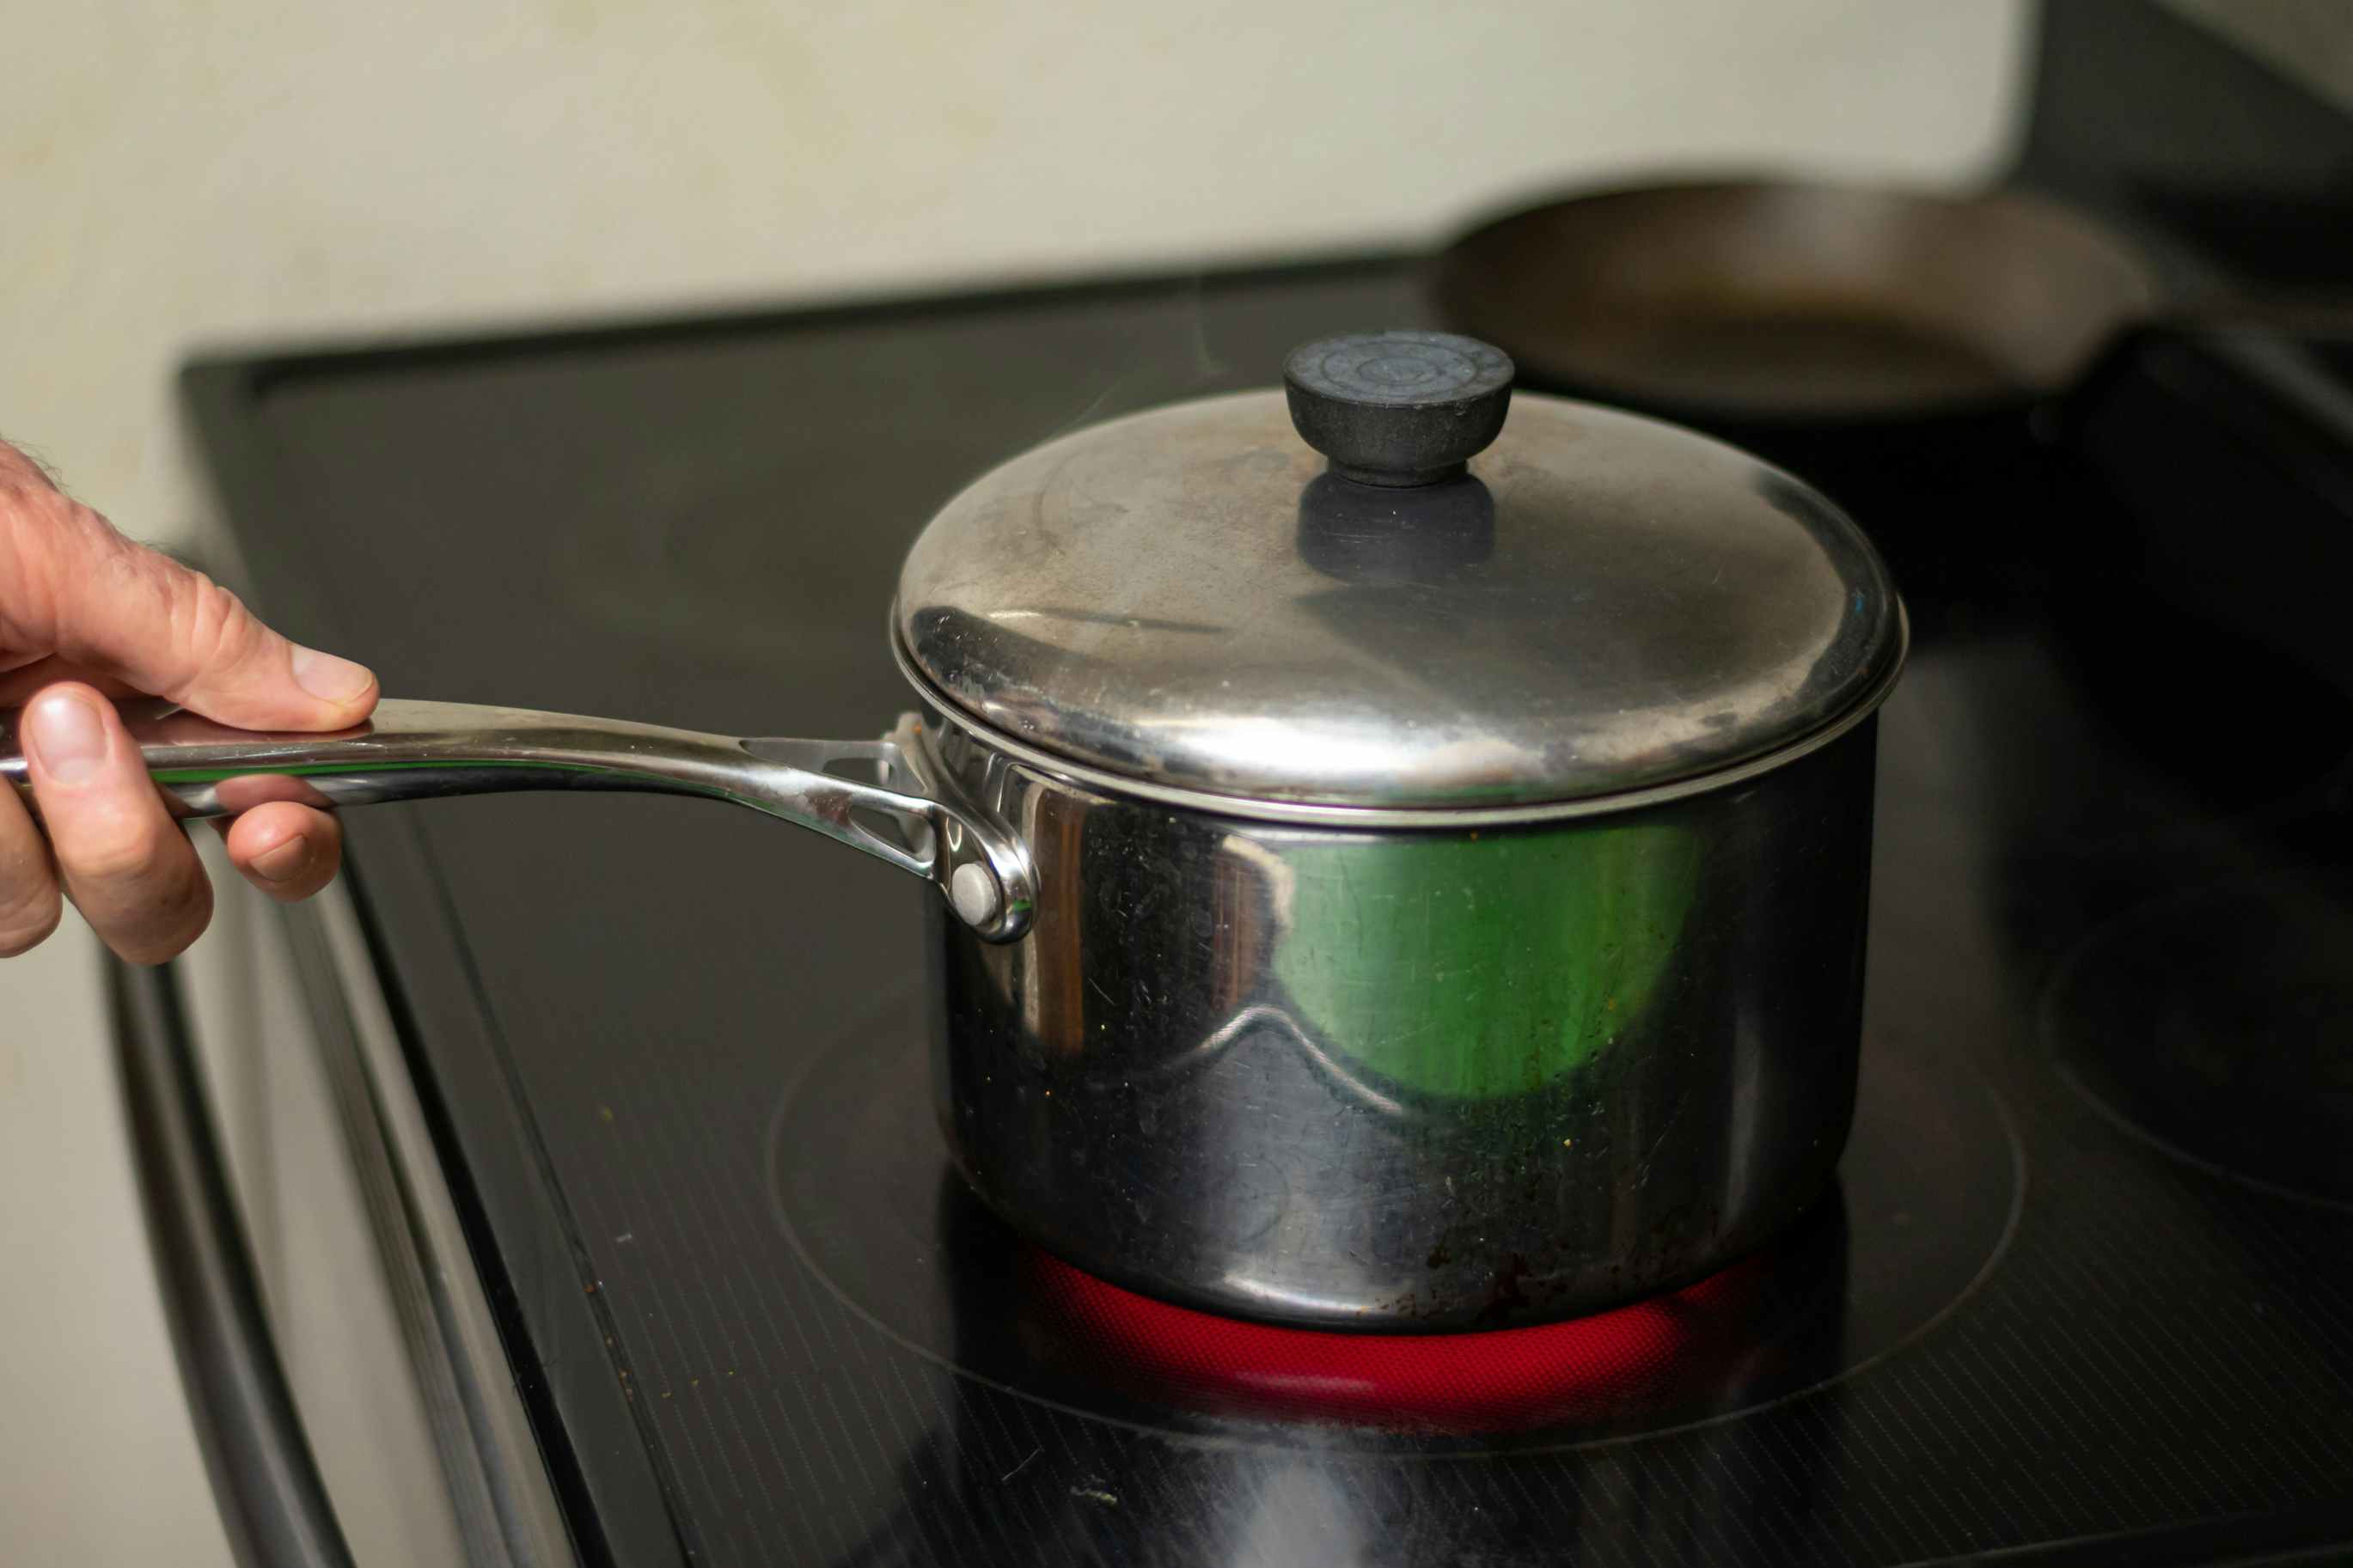 A saucepan on a stovetop being used to heat up popcorn